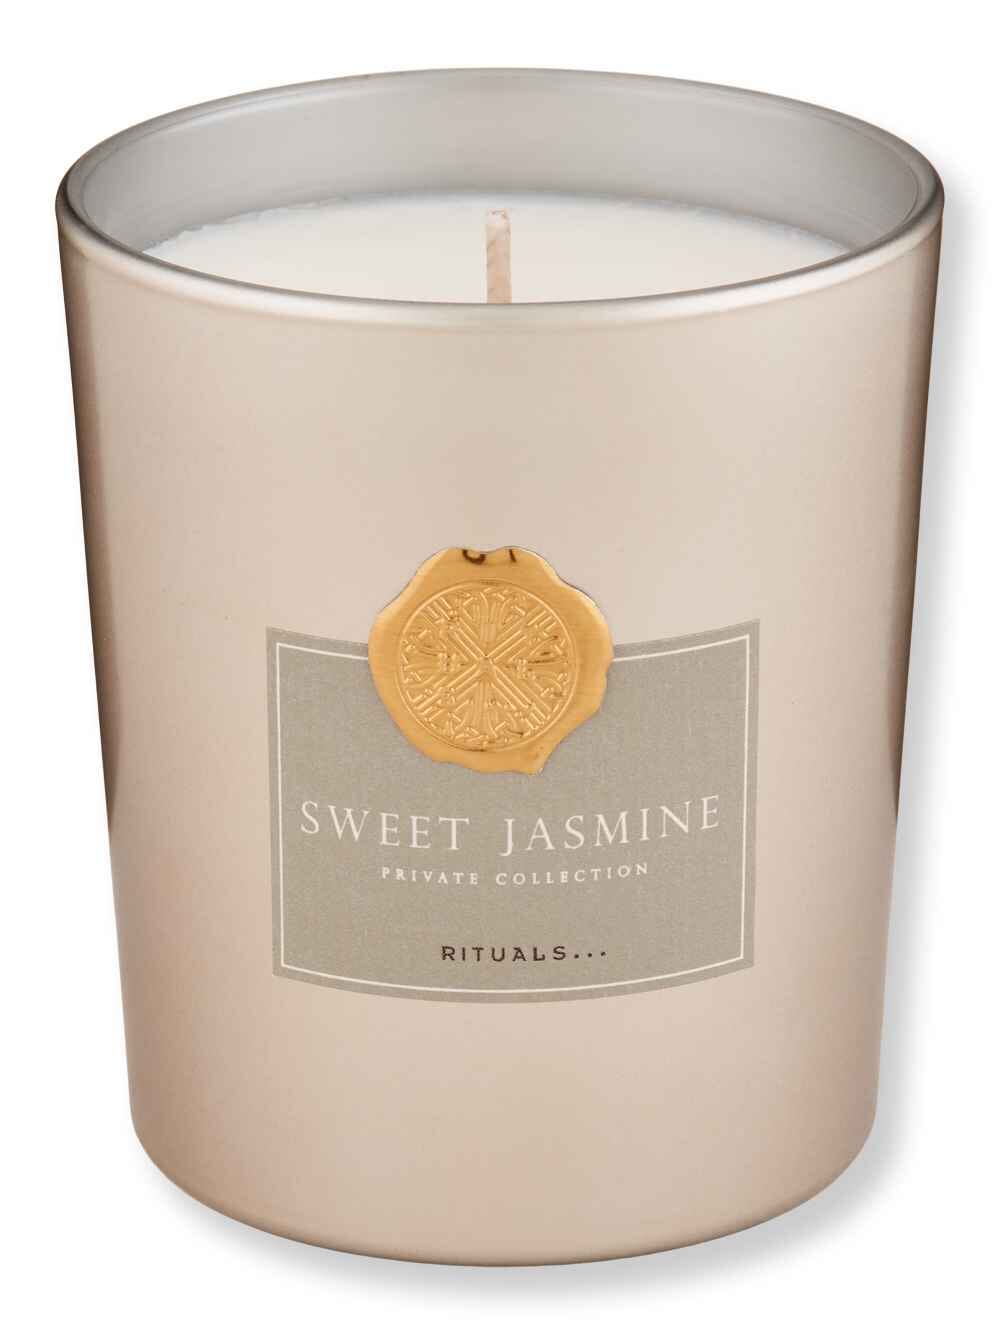 Rituals Rituals Sweet Jasmine Scented Candle 360 g Candles & Diffusers 